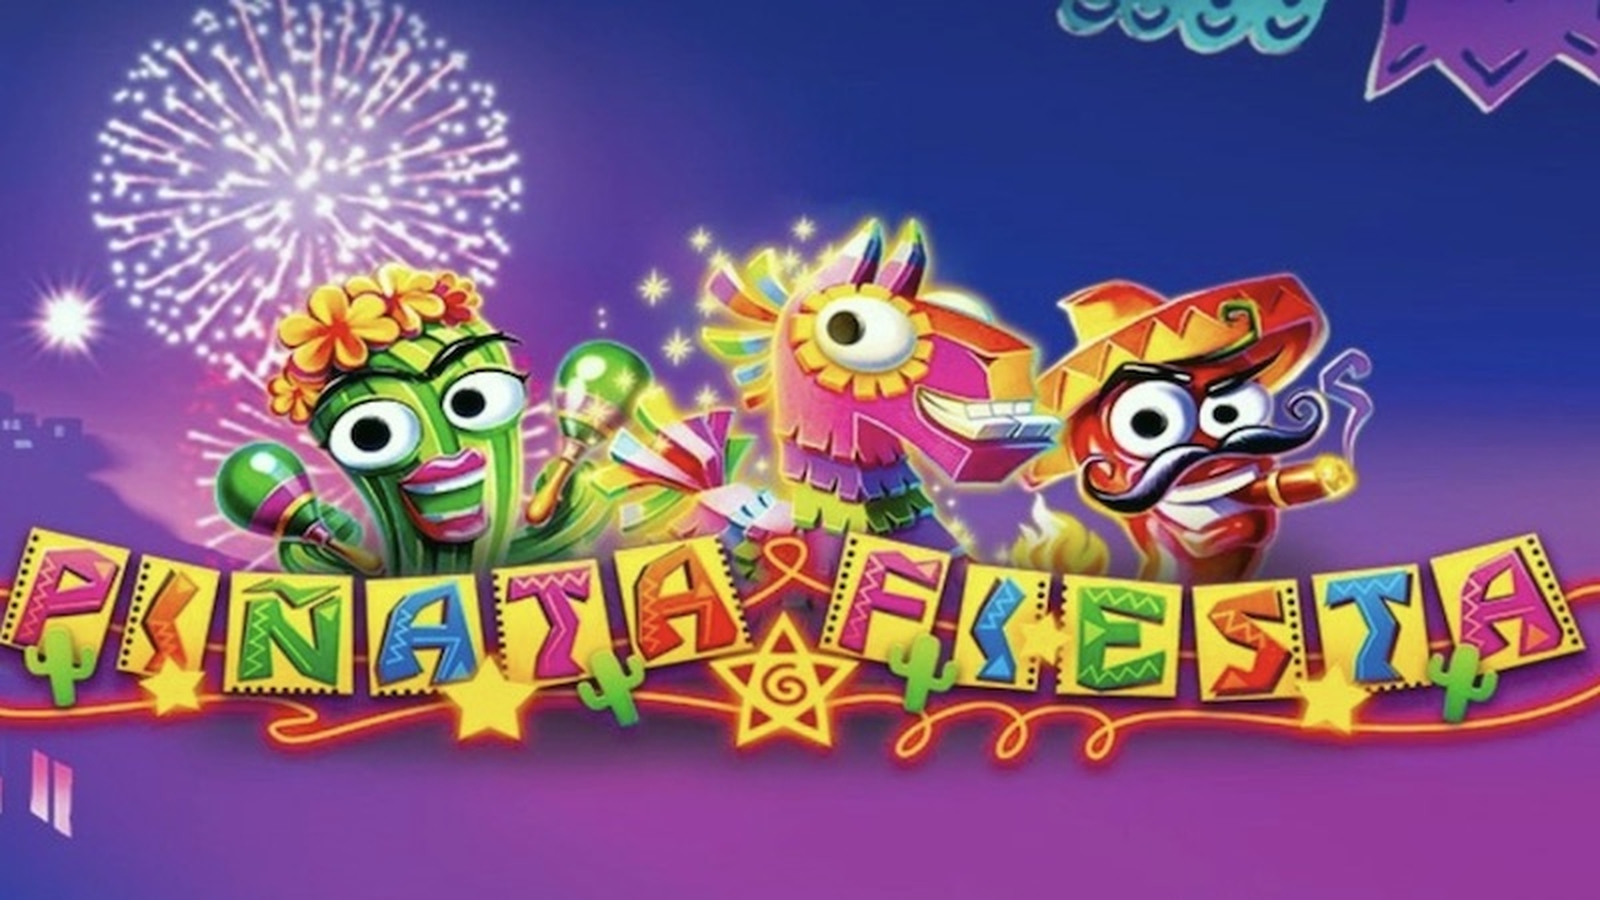 The Pinata Fiesta Online Slot Demo Game by iSoftBet